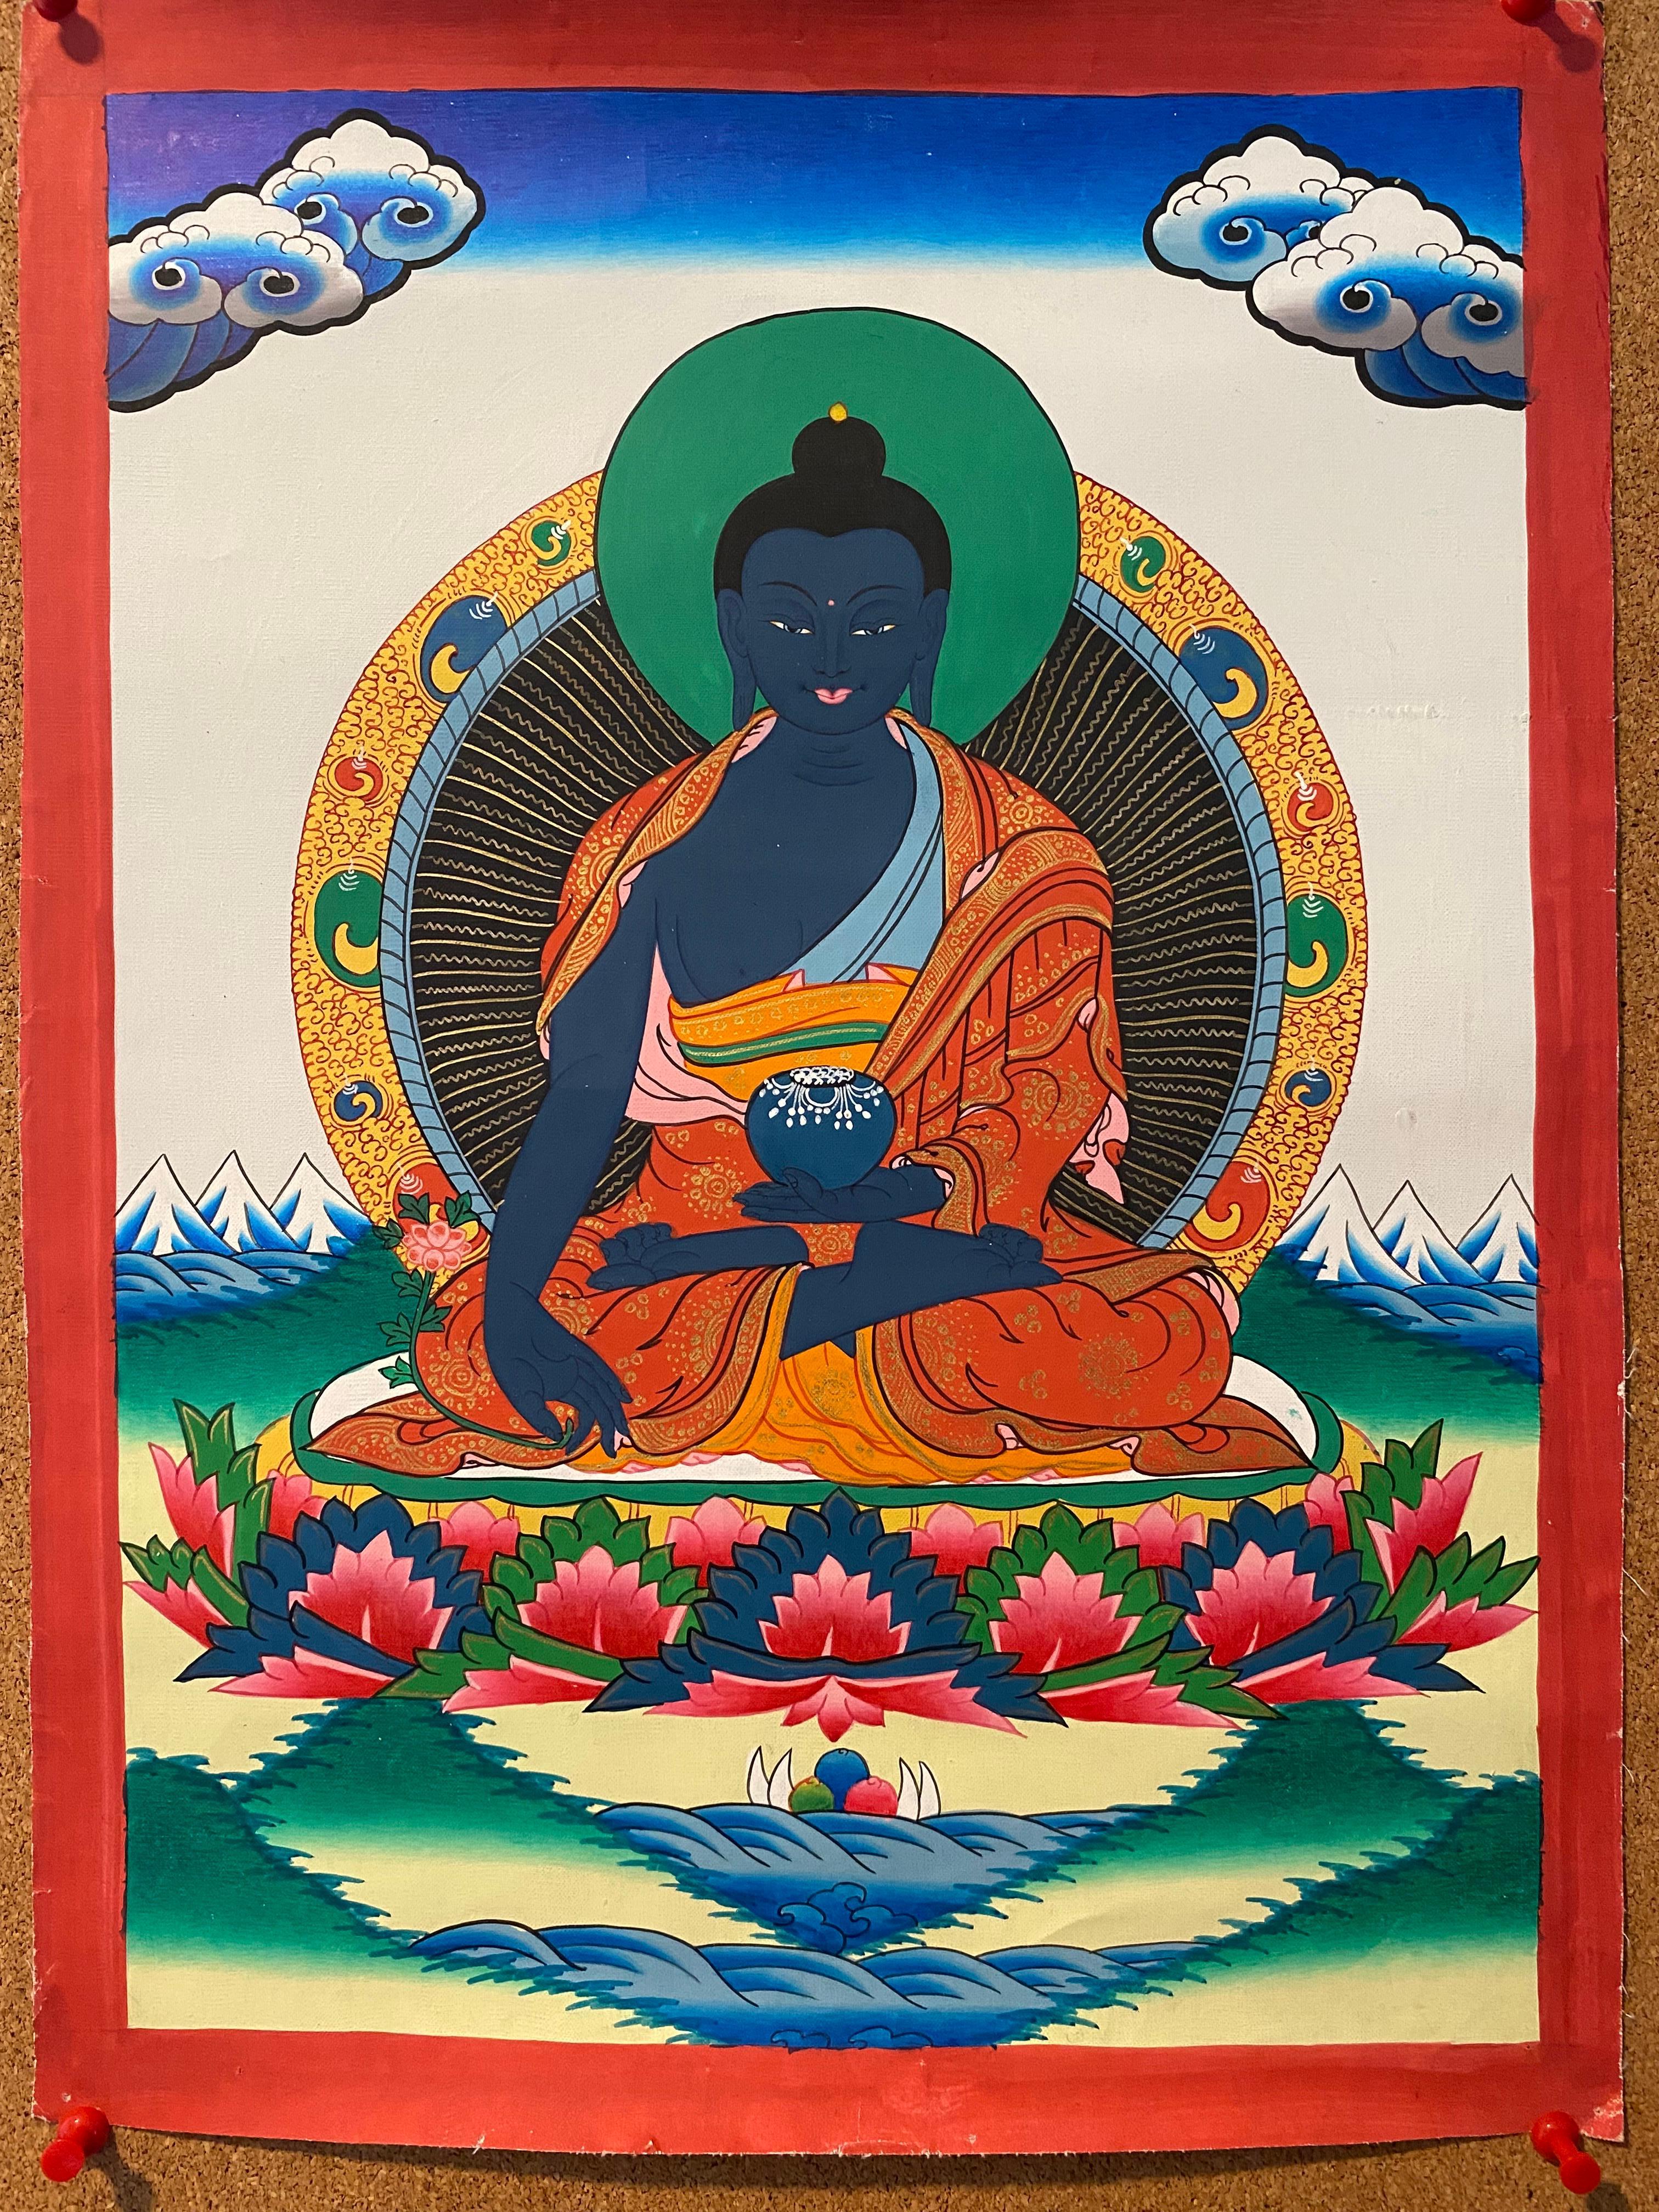 Unframed Hand Painted Medicine Buddha Thangka on Canvas 24K Gold - Other Art Style Painting by Unknown